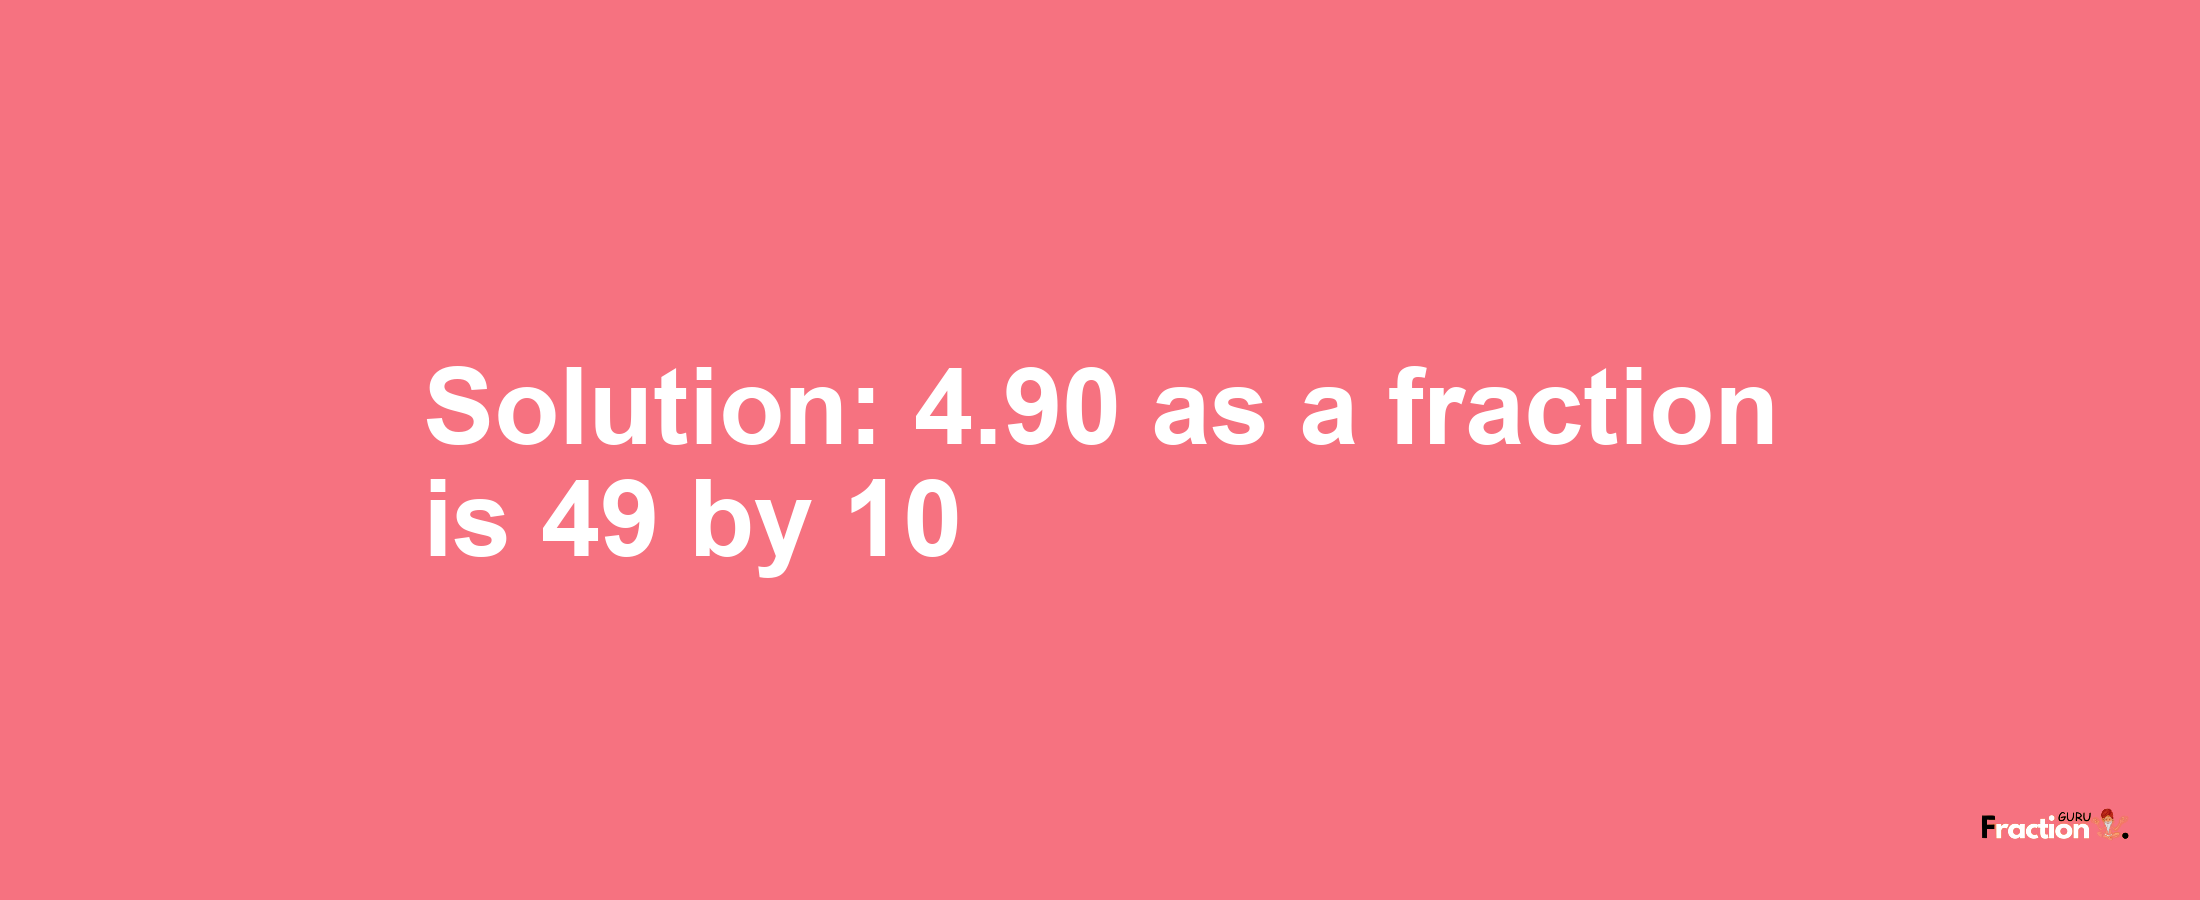 Solution:4.90 as a fraction is 49/10